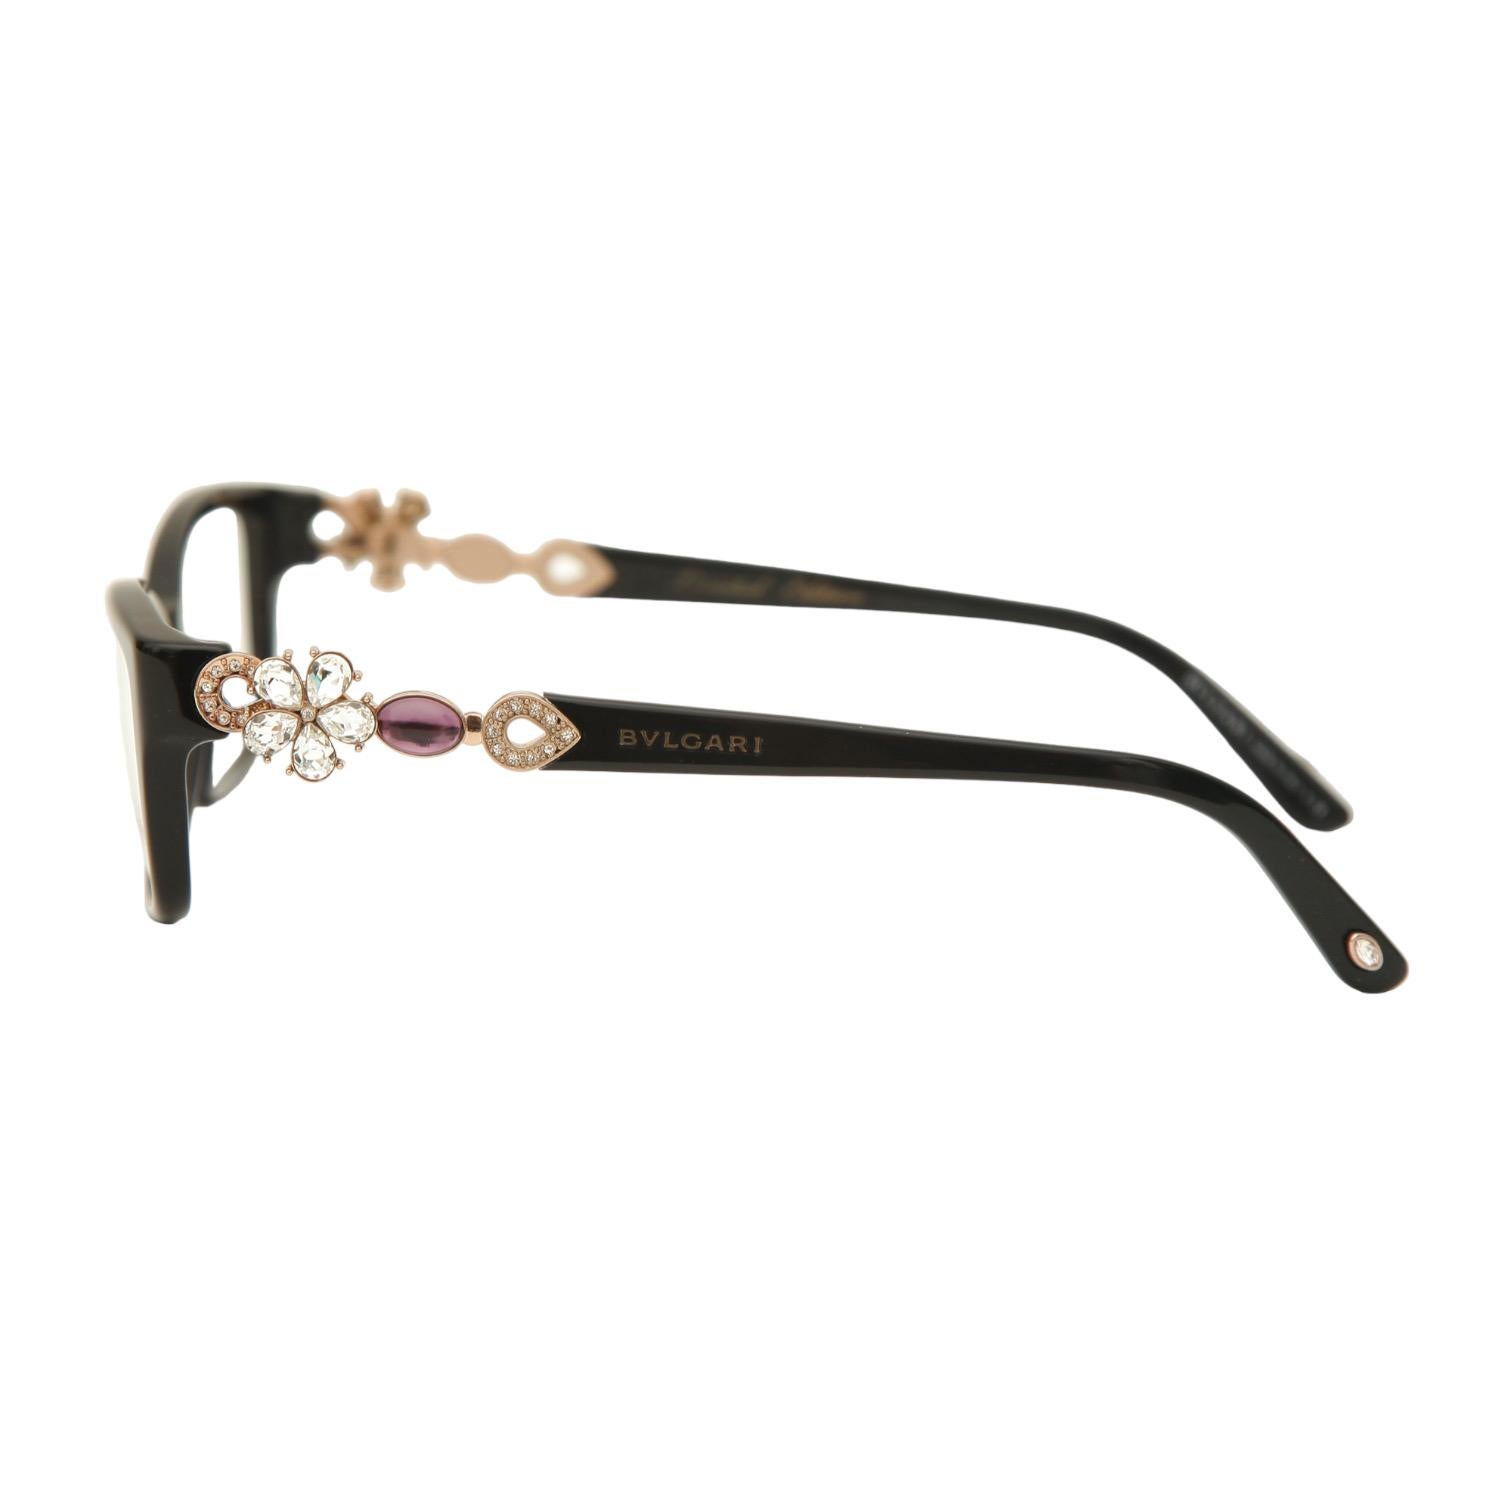 bvlgari glasses frames with crystals